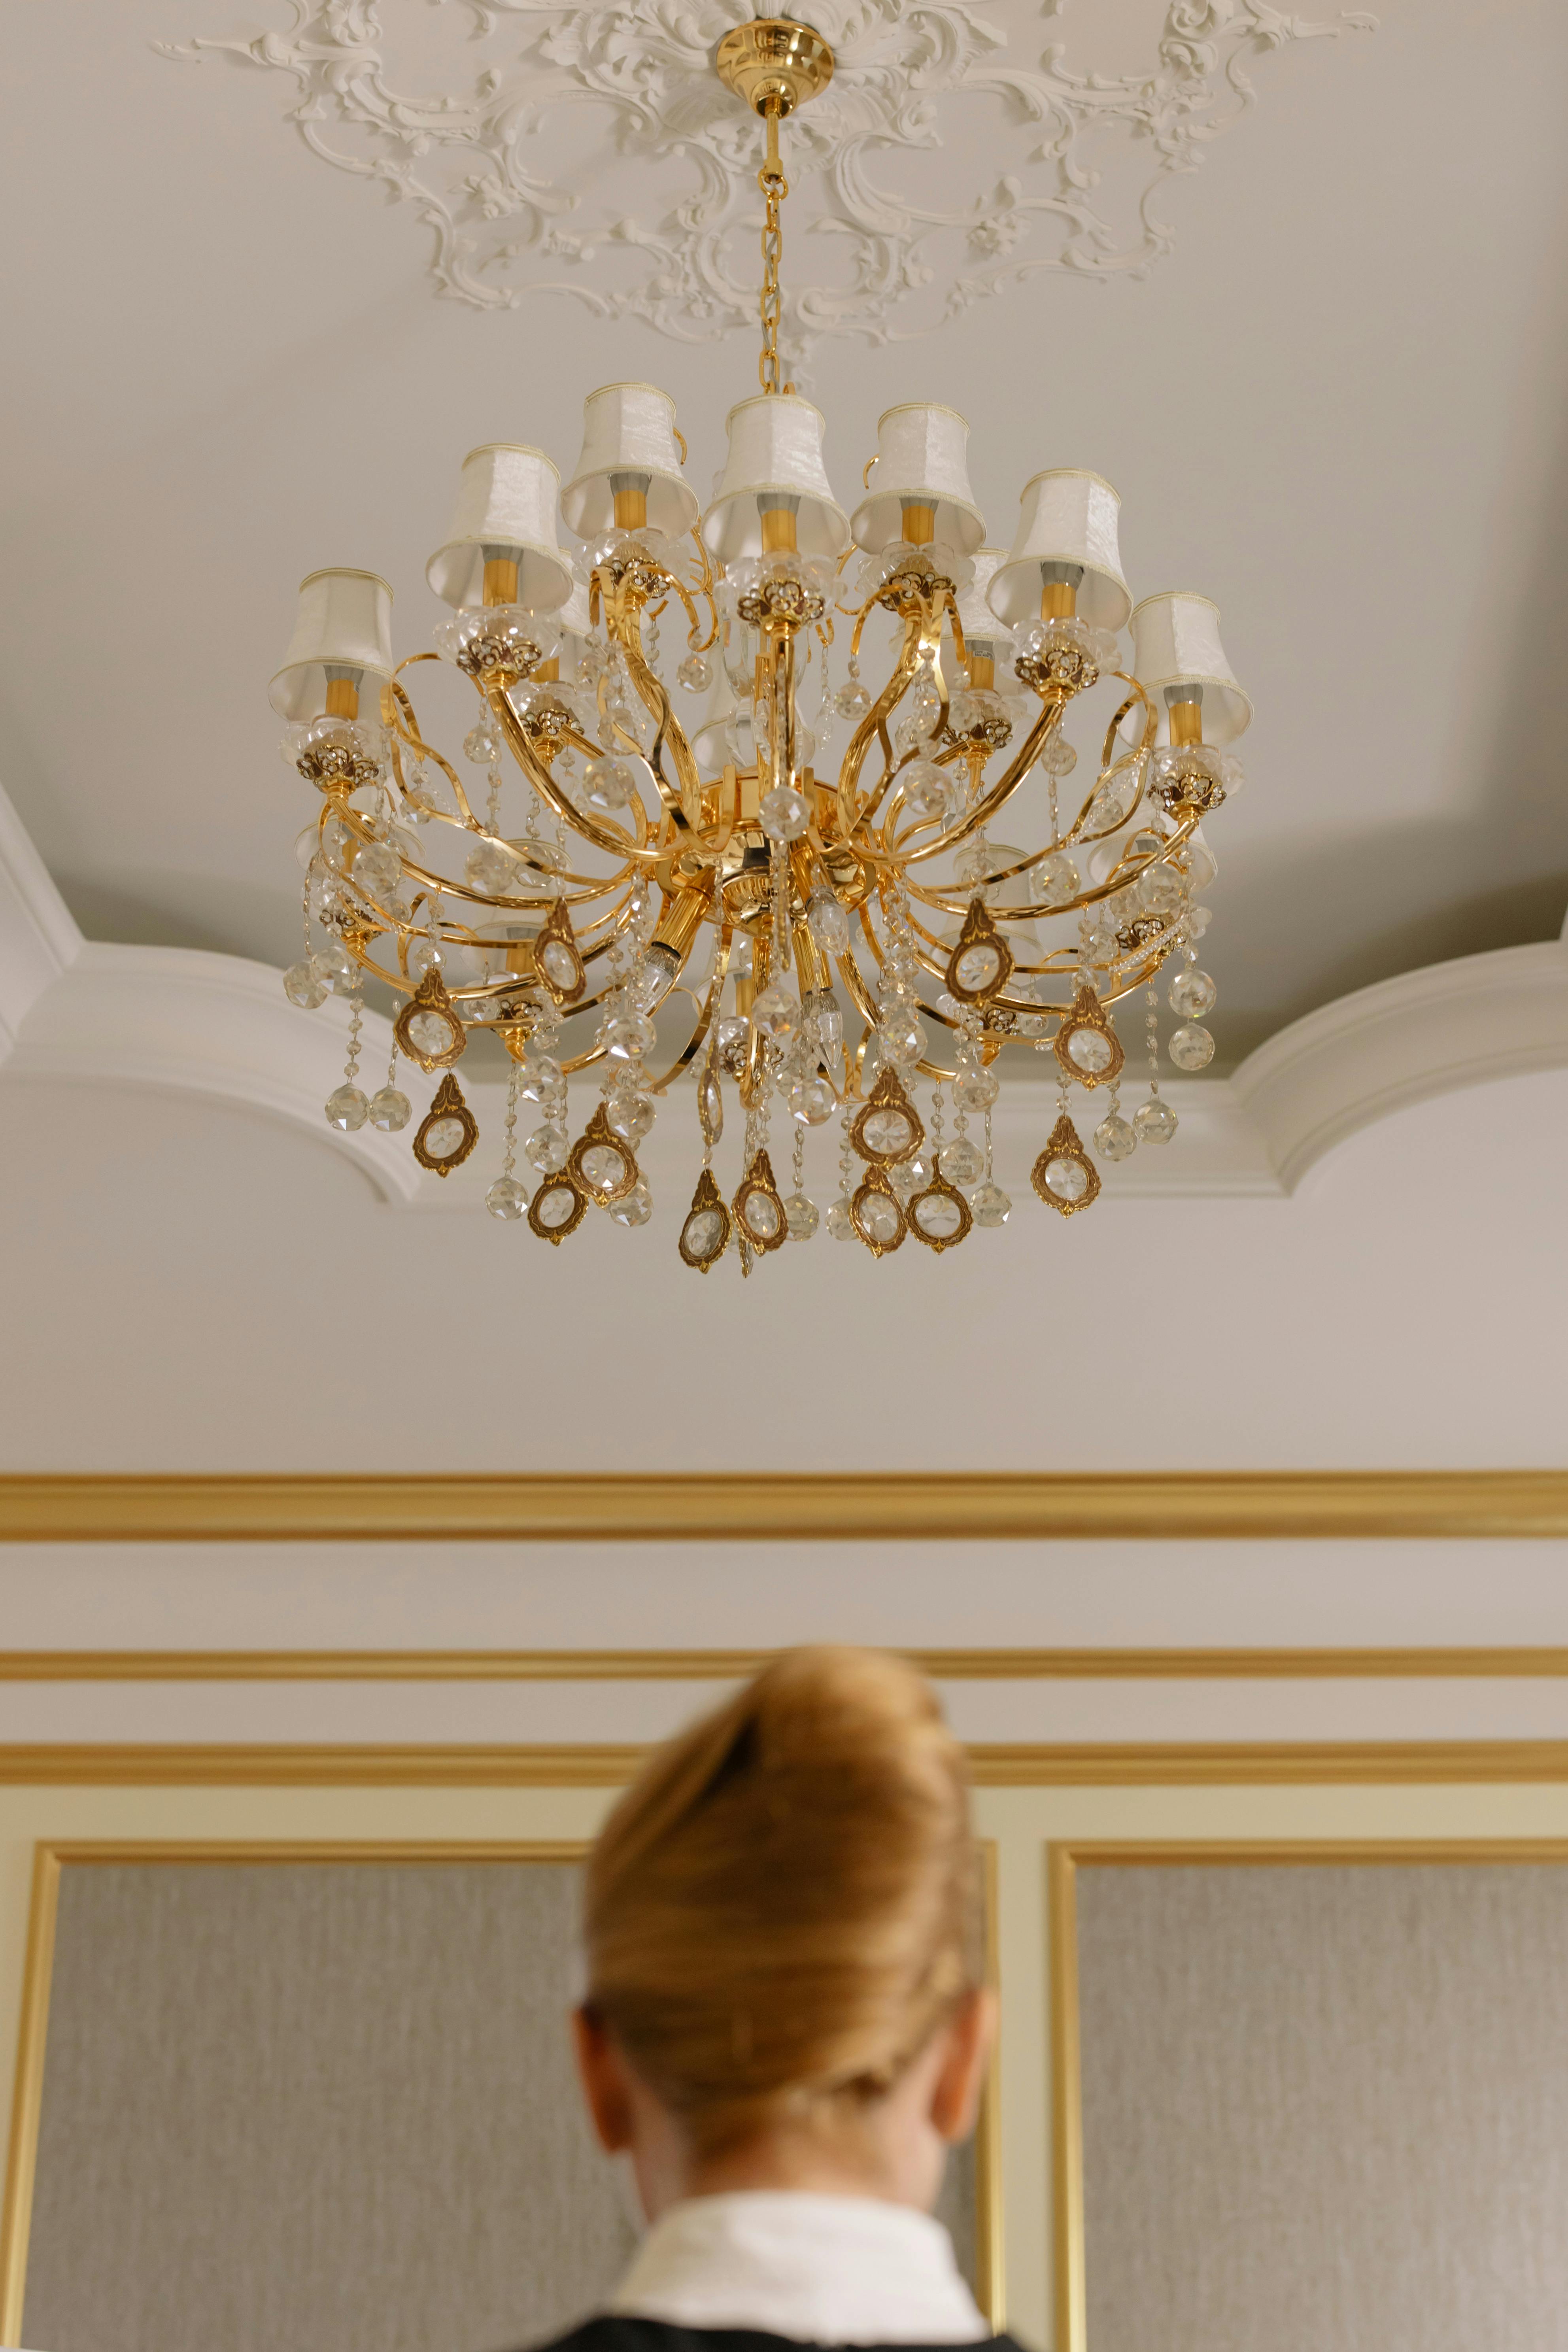 Woman standing under a chandelier of a hotel room | Source: Pexels